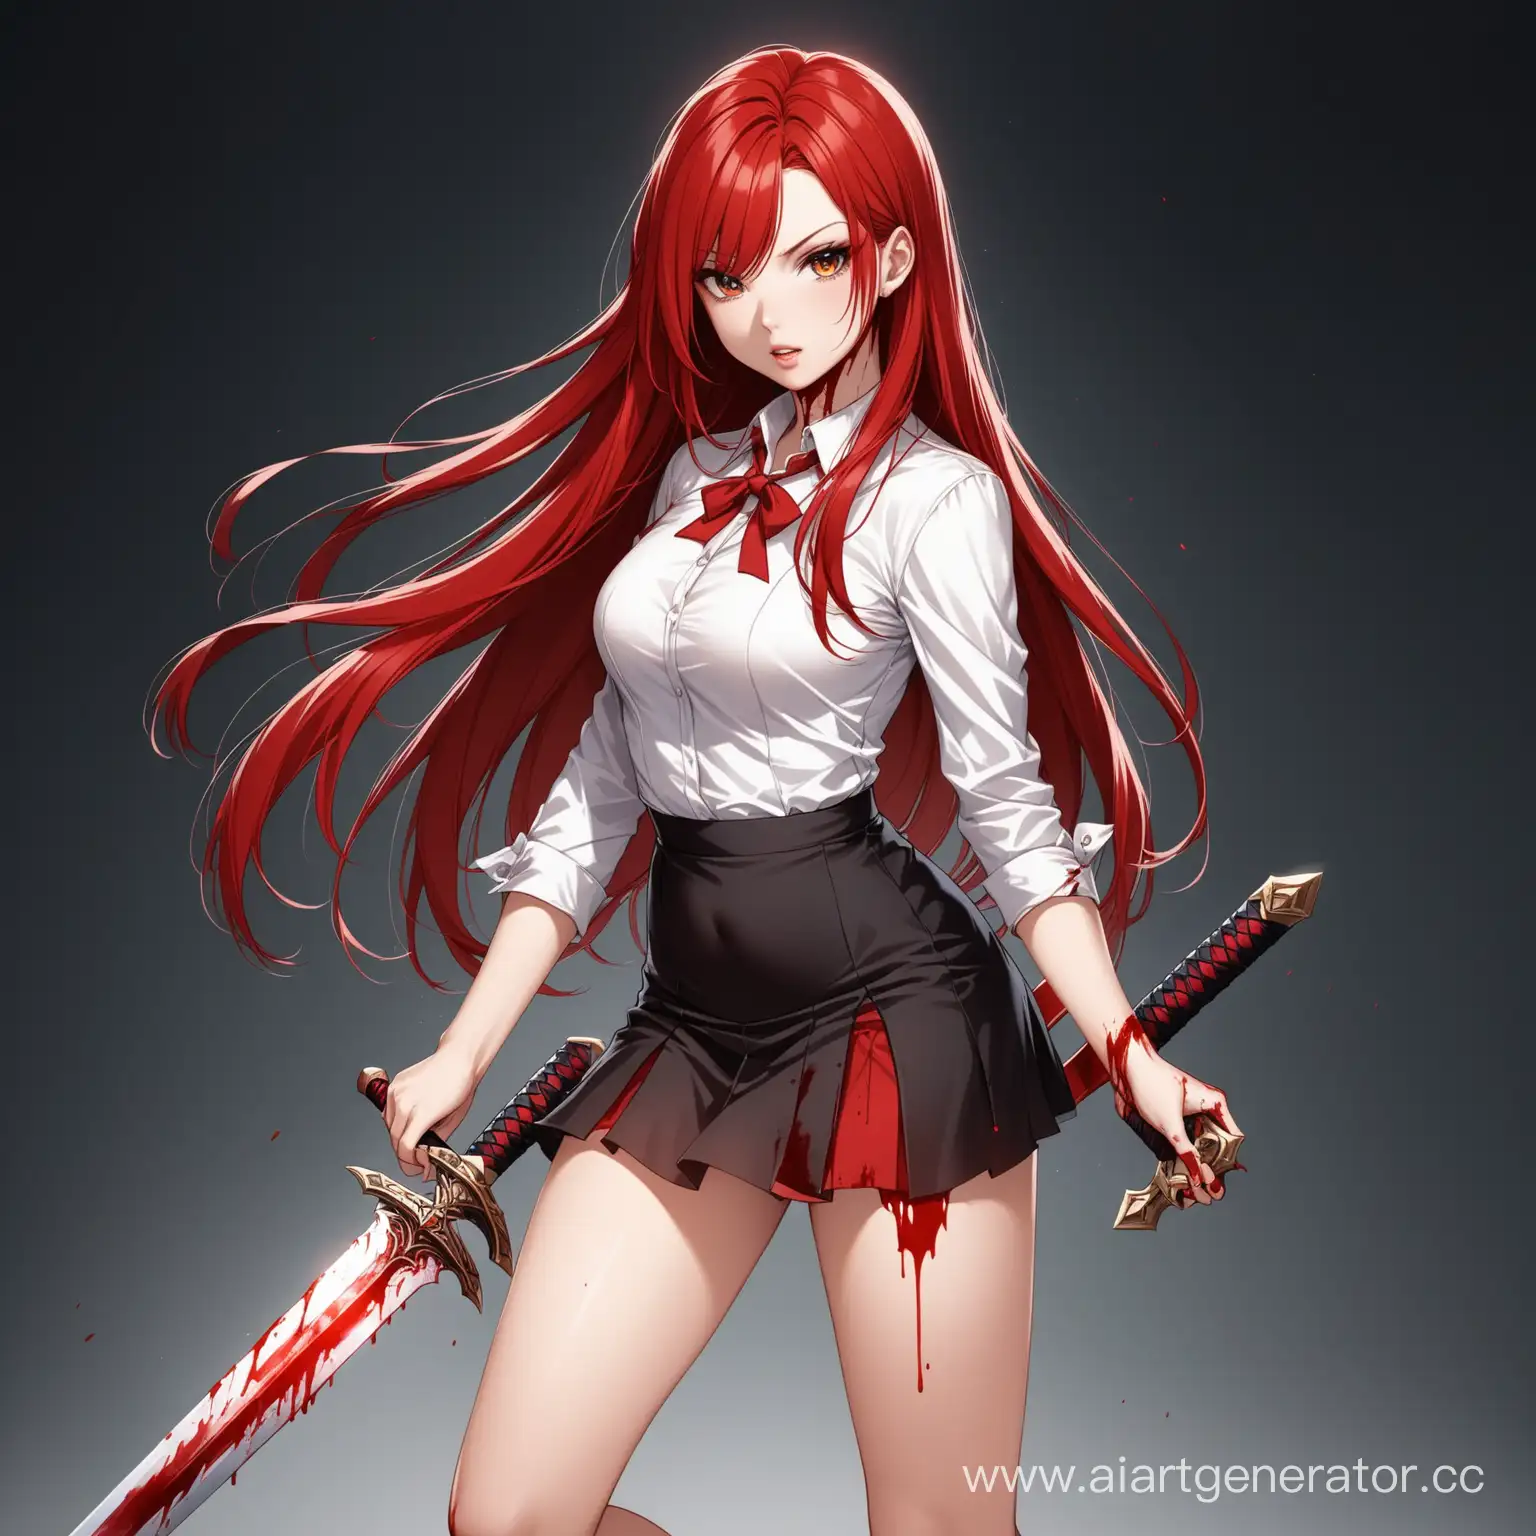 Seductive-RedHaired-Woman-Wielding-a-Bloody-Sword